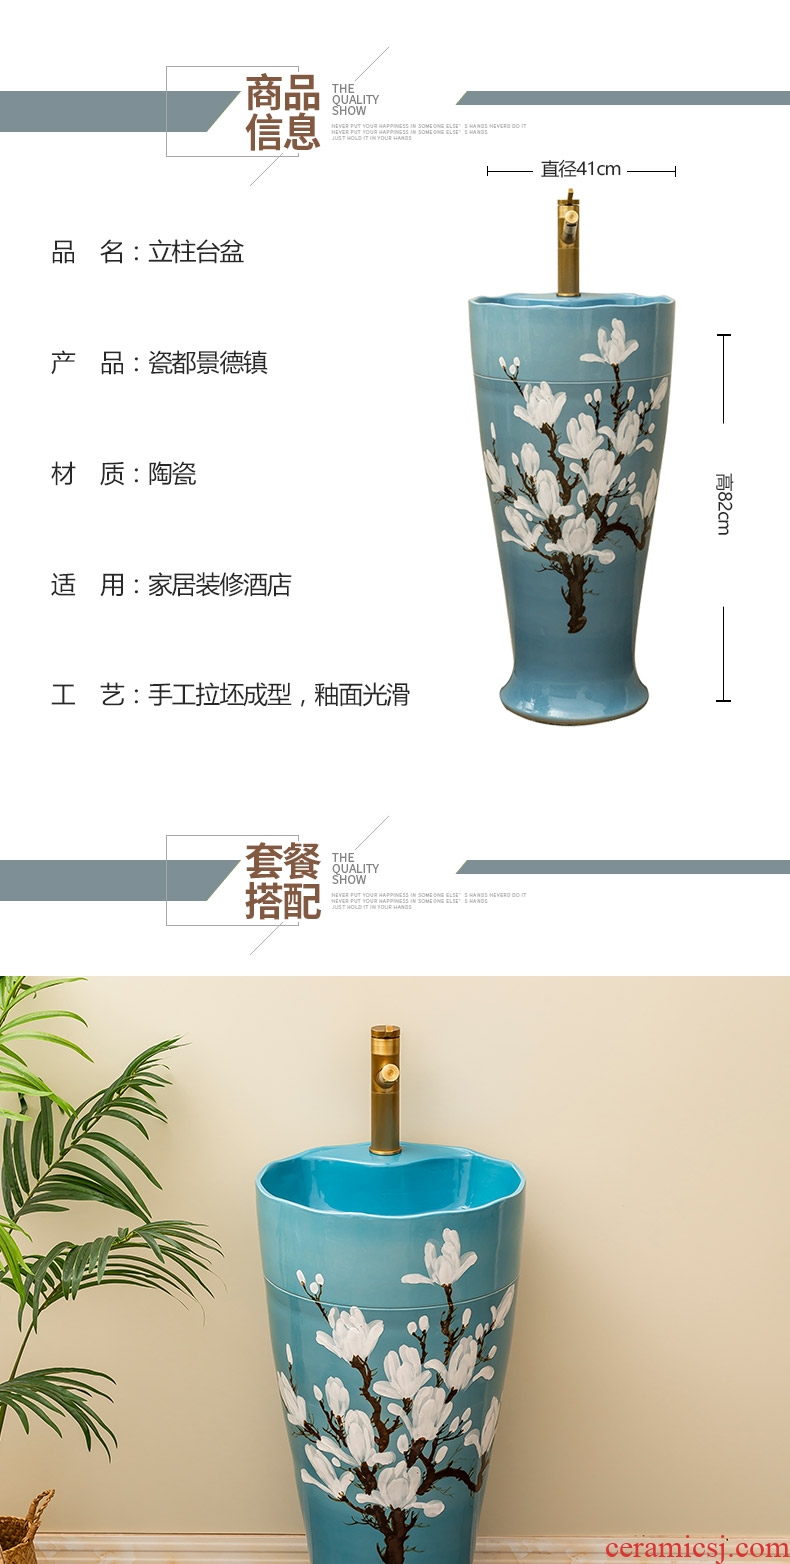 Ceramic column type restoring ancient ways the lavatory balcony column basin integrated household is suing courtyard floor the sink